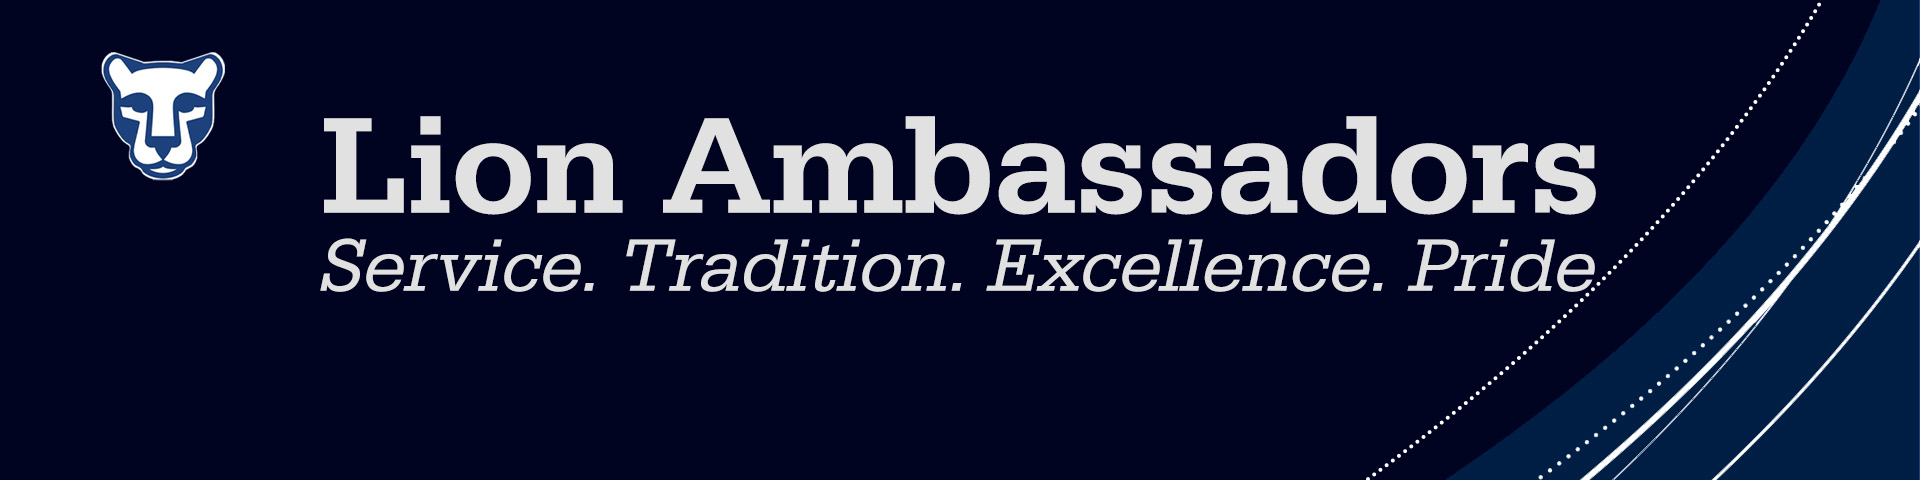 Lion Ambassadors. Service. Tradition. Excellence. Pride